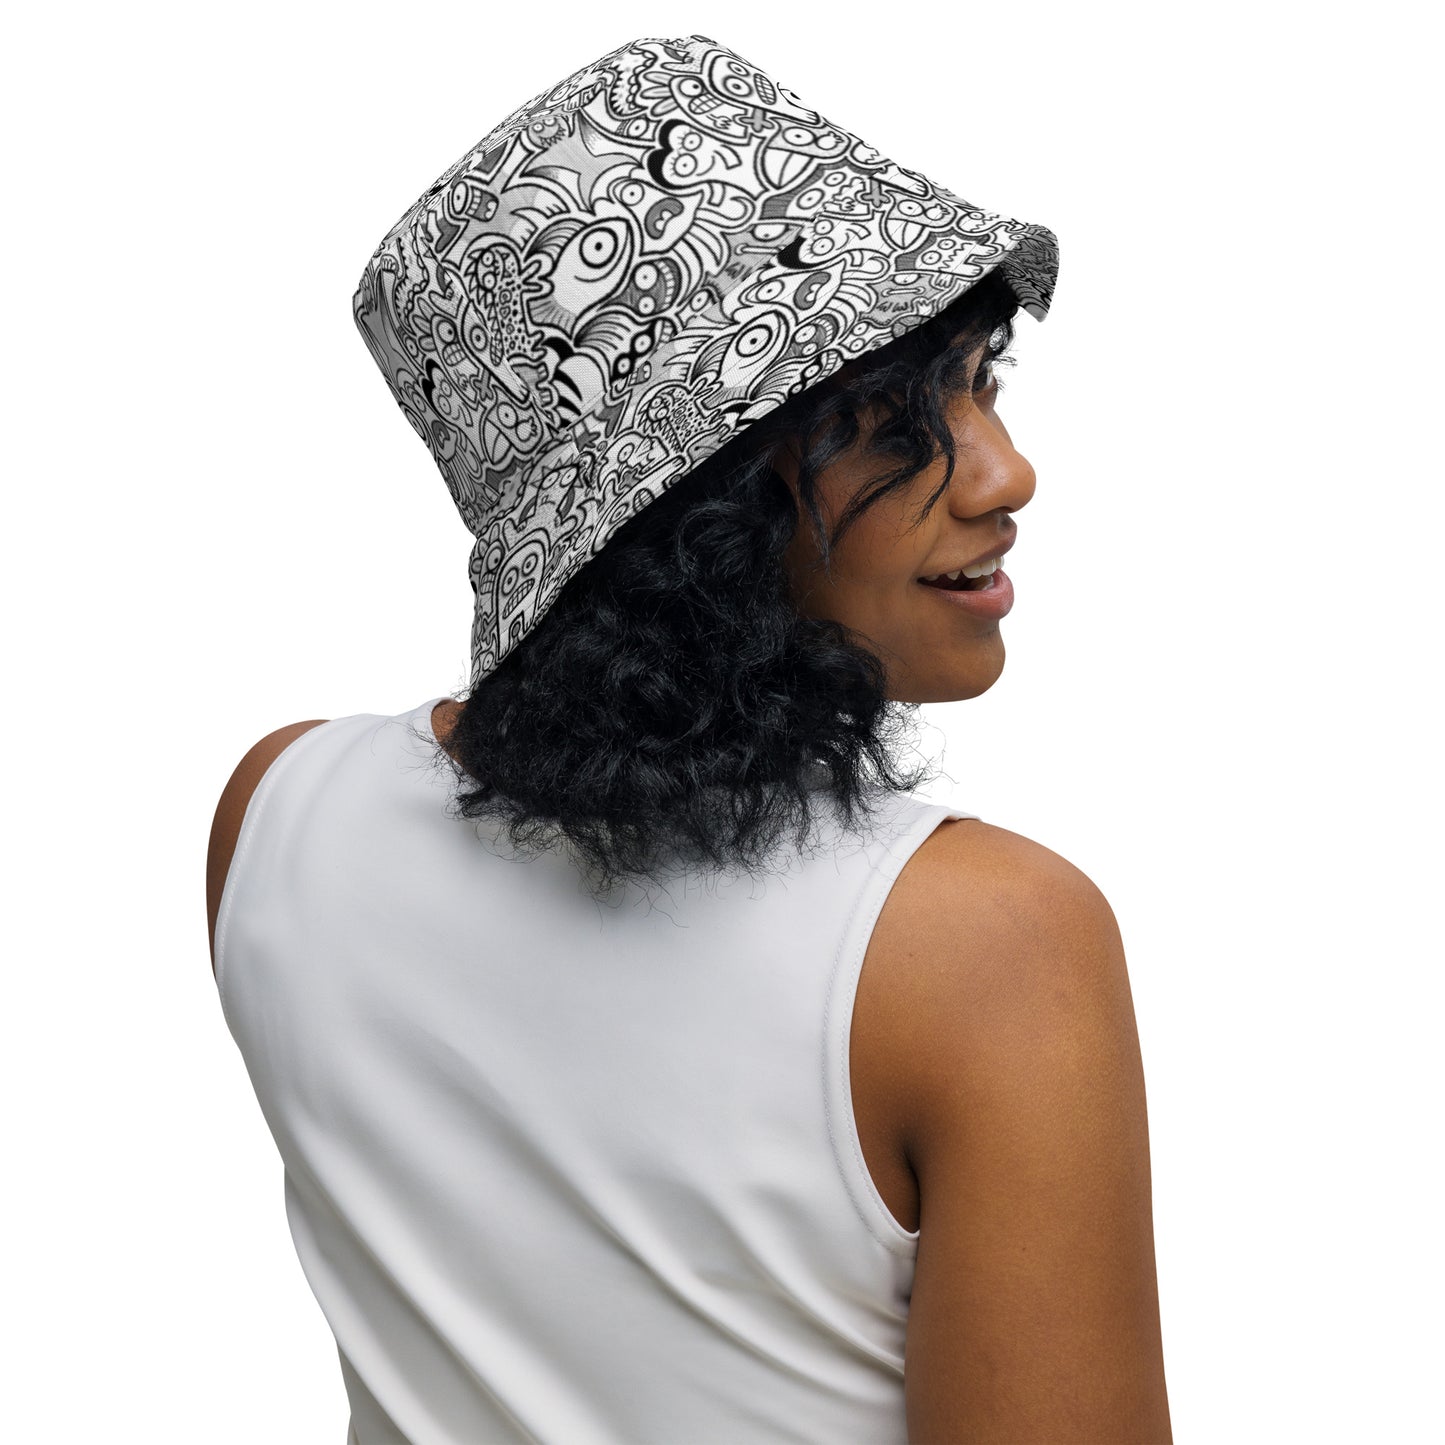 Fill your world with cool doodles Reversible bucket hat. Woman wearing Zoo&co’s bucket hat